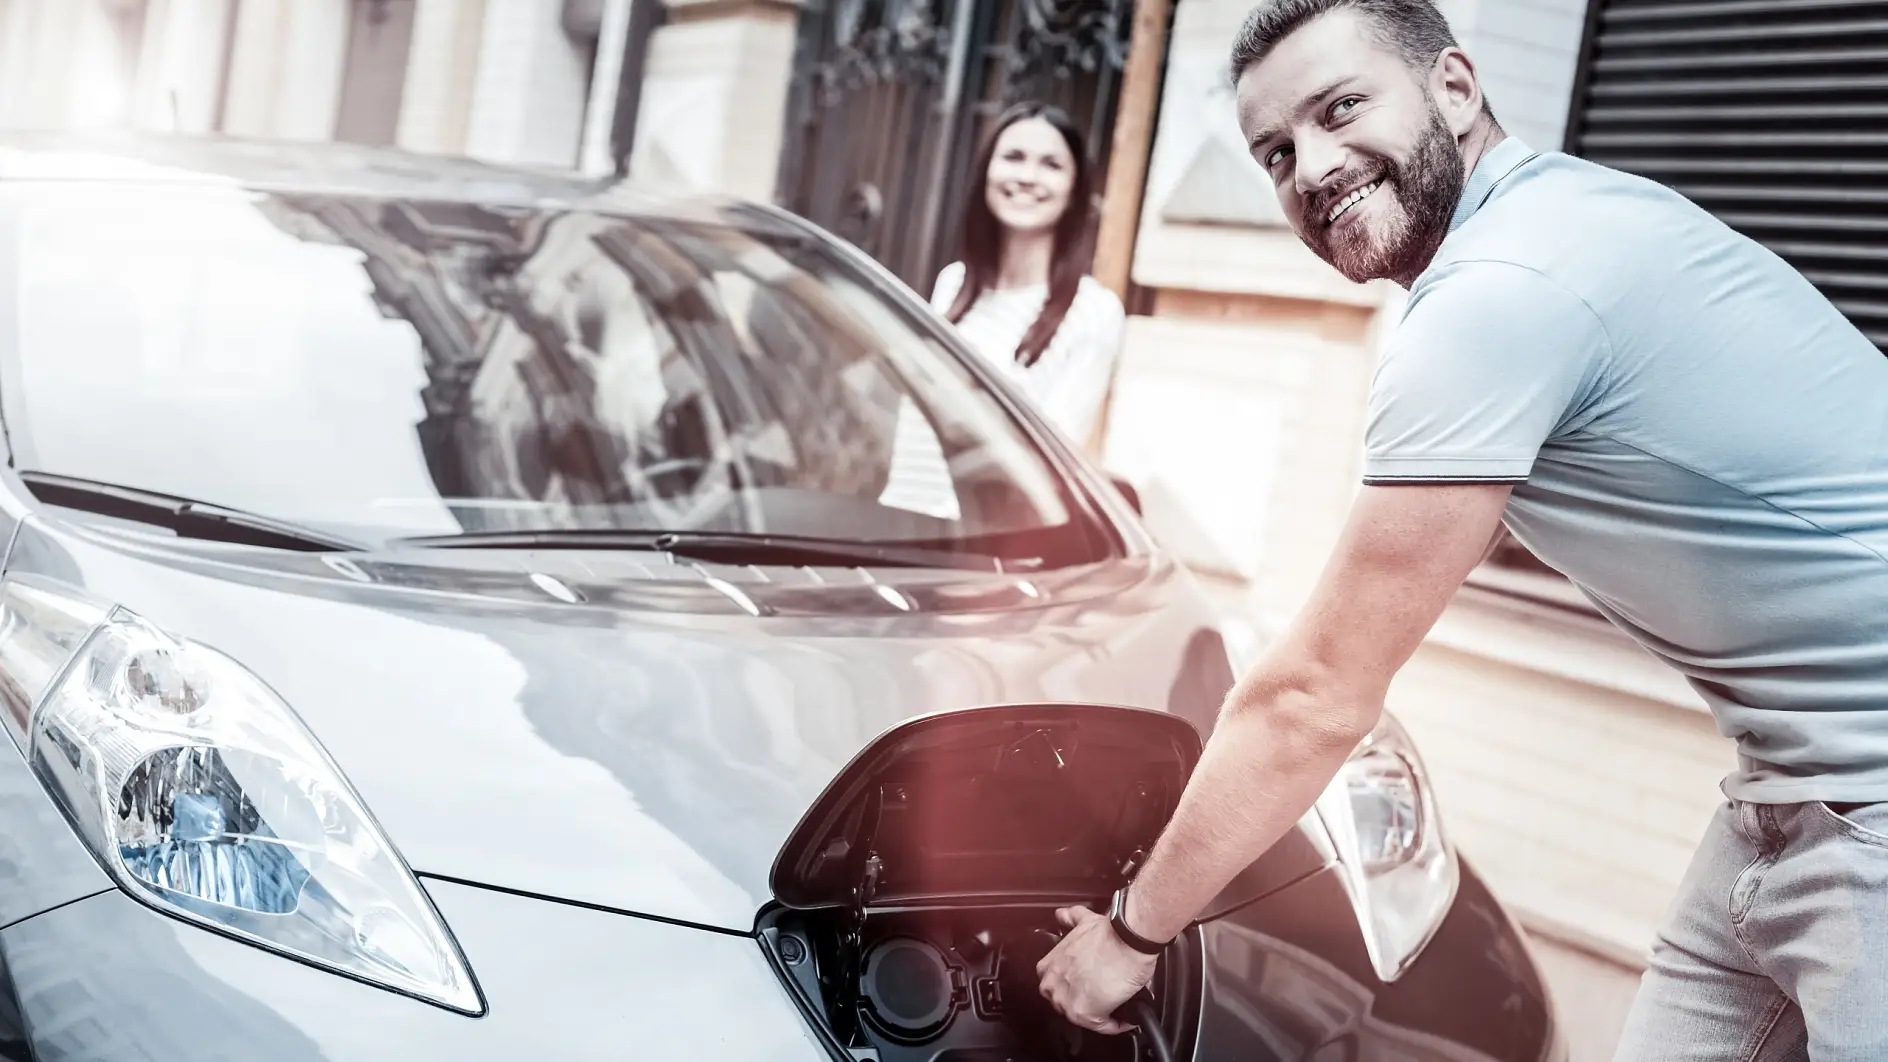 Easy and ecological transportation. Selective focus on a happy millennial guy grinning broadly while holding a charging nozzle and enjoying the process of his eco car supplying energy outdoors.